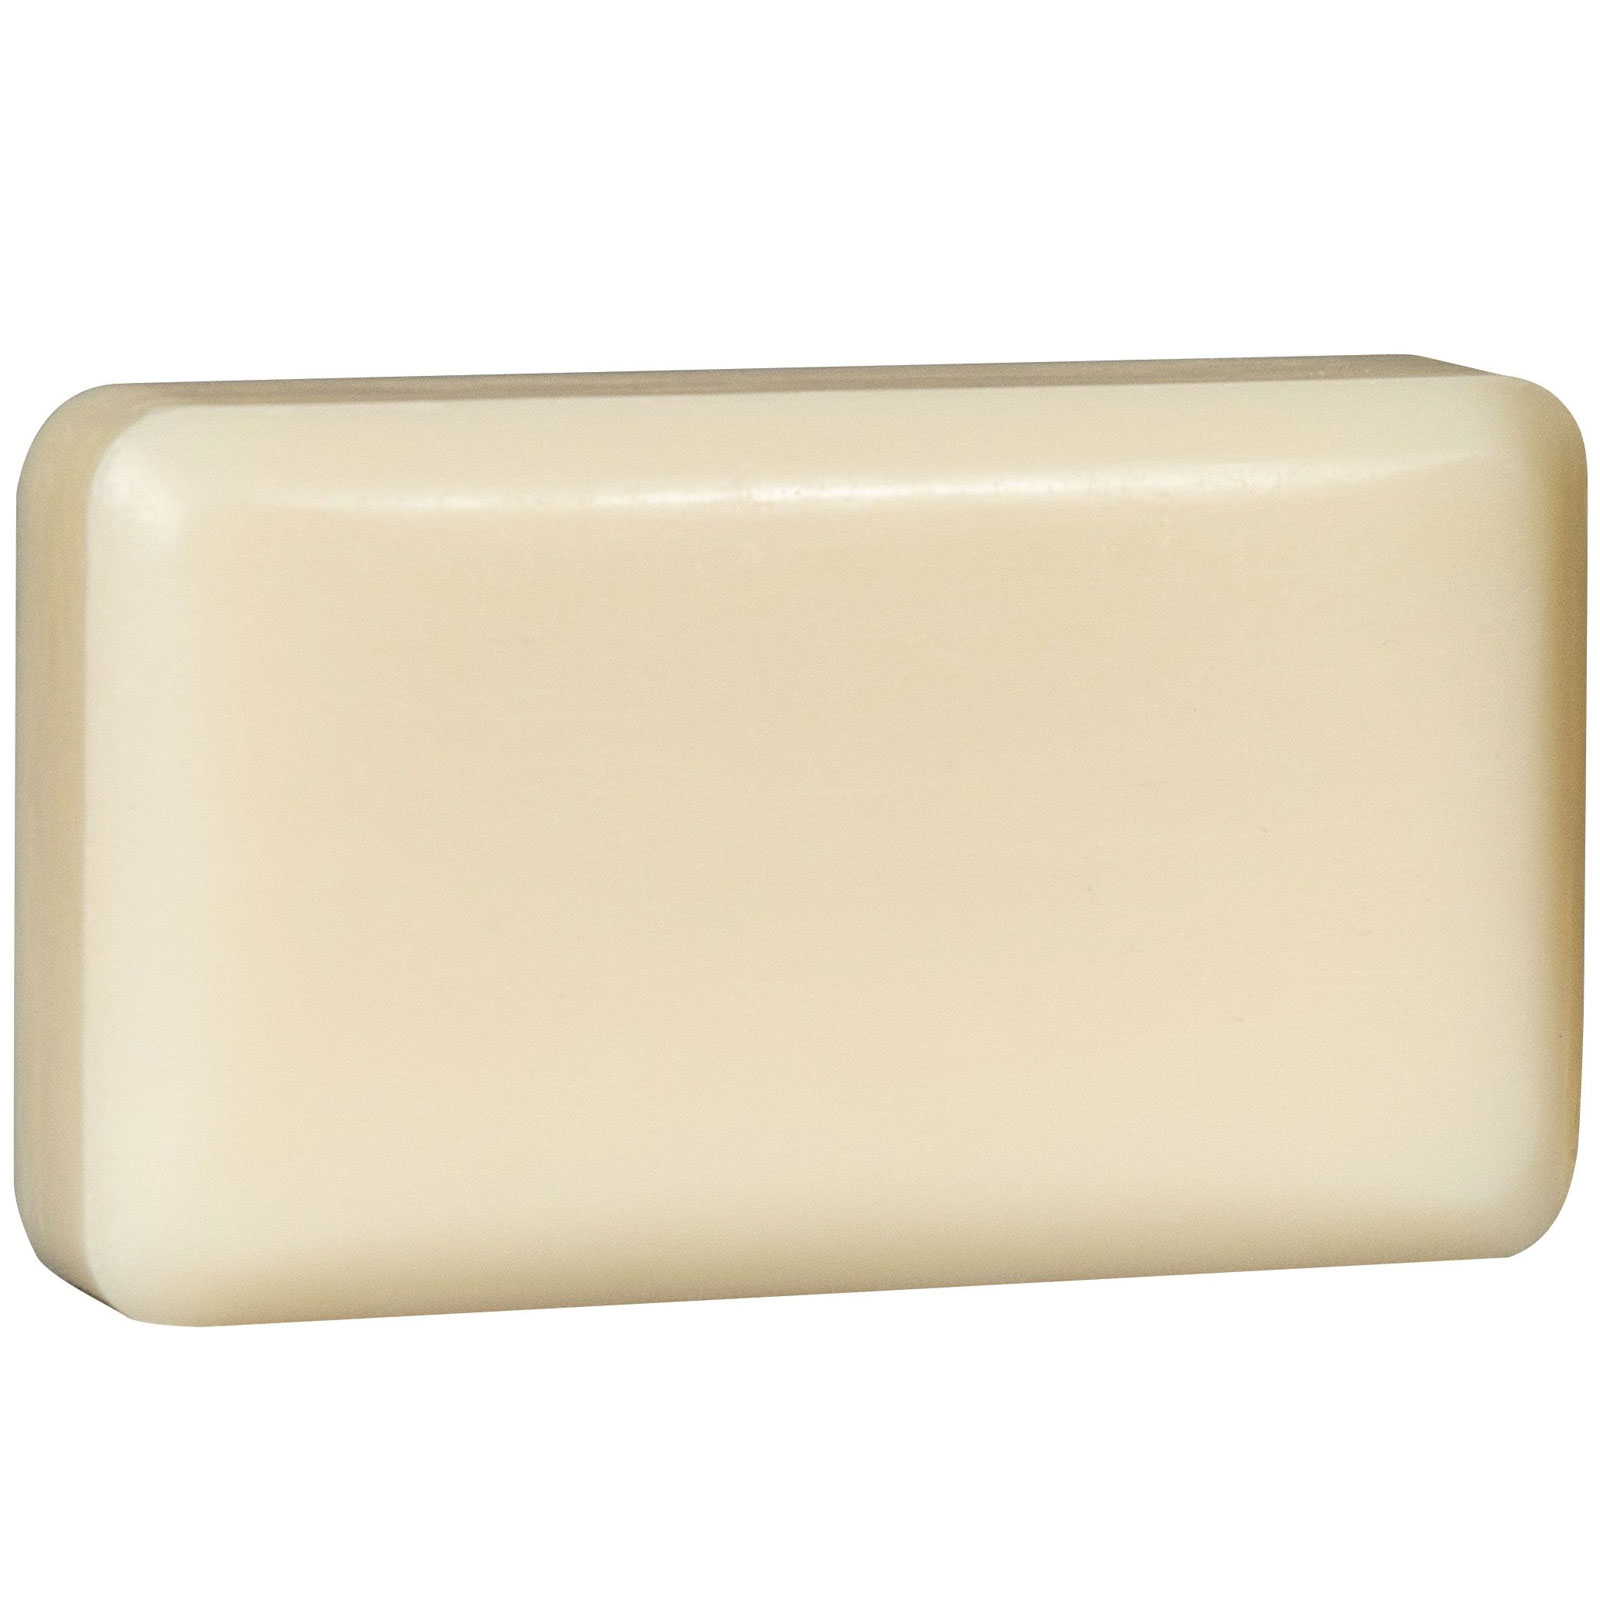 Code Blue Bar Soap from BuyMBS.com